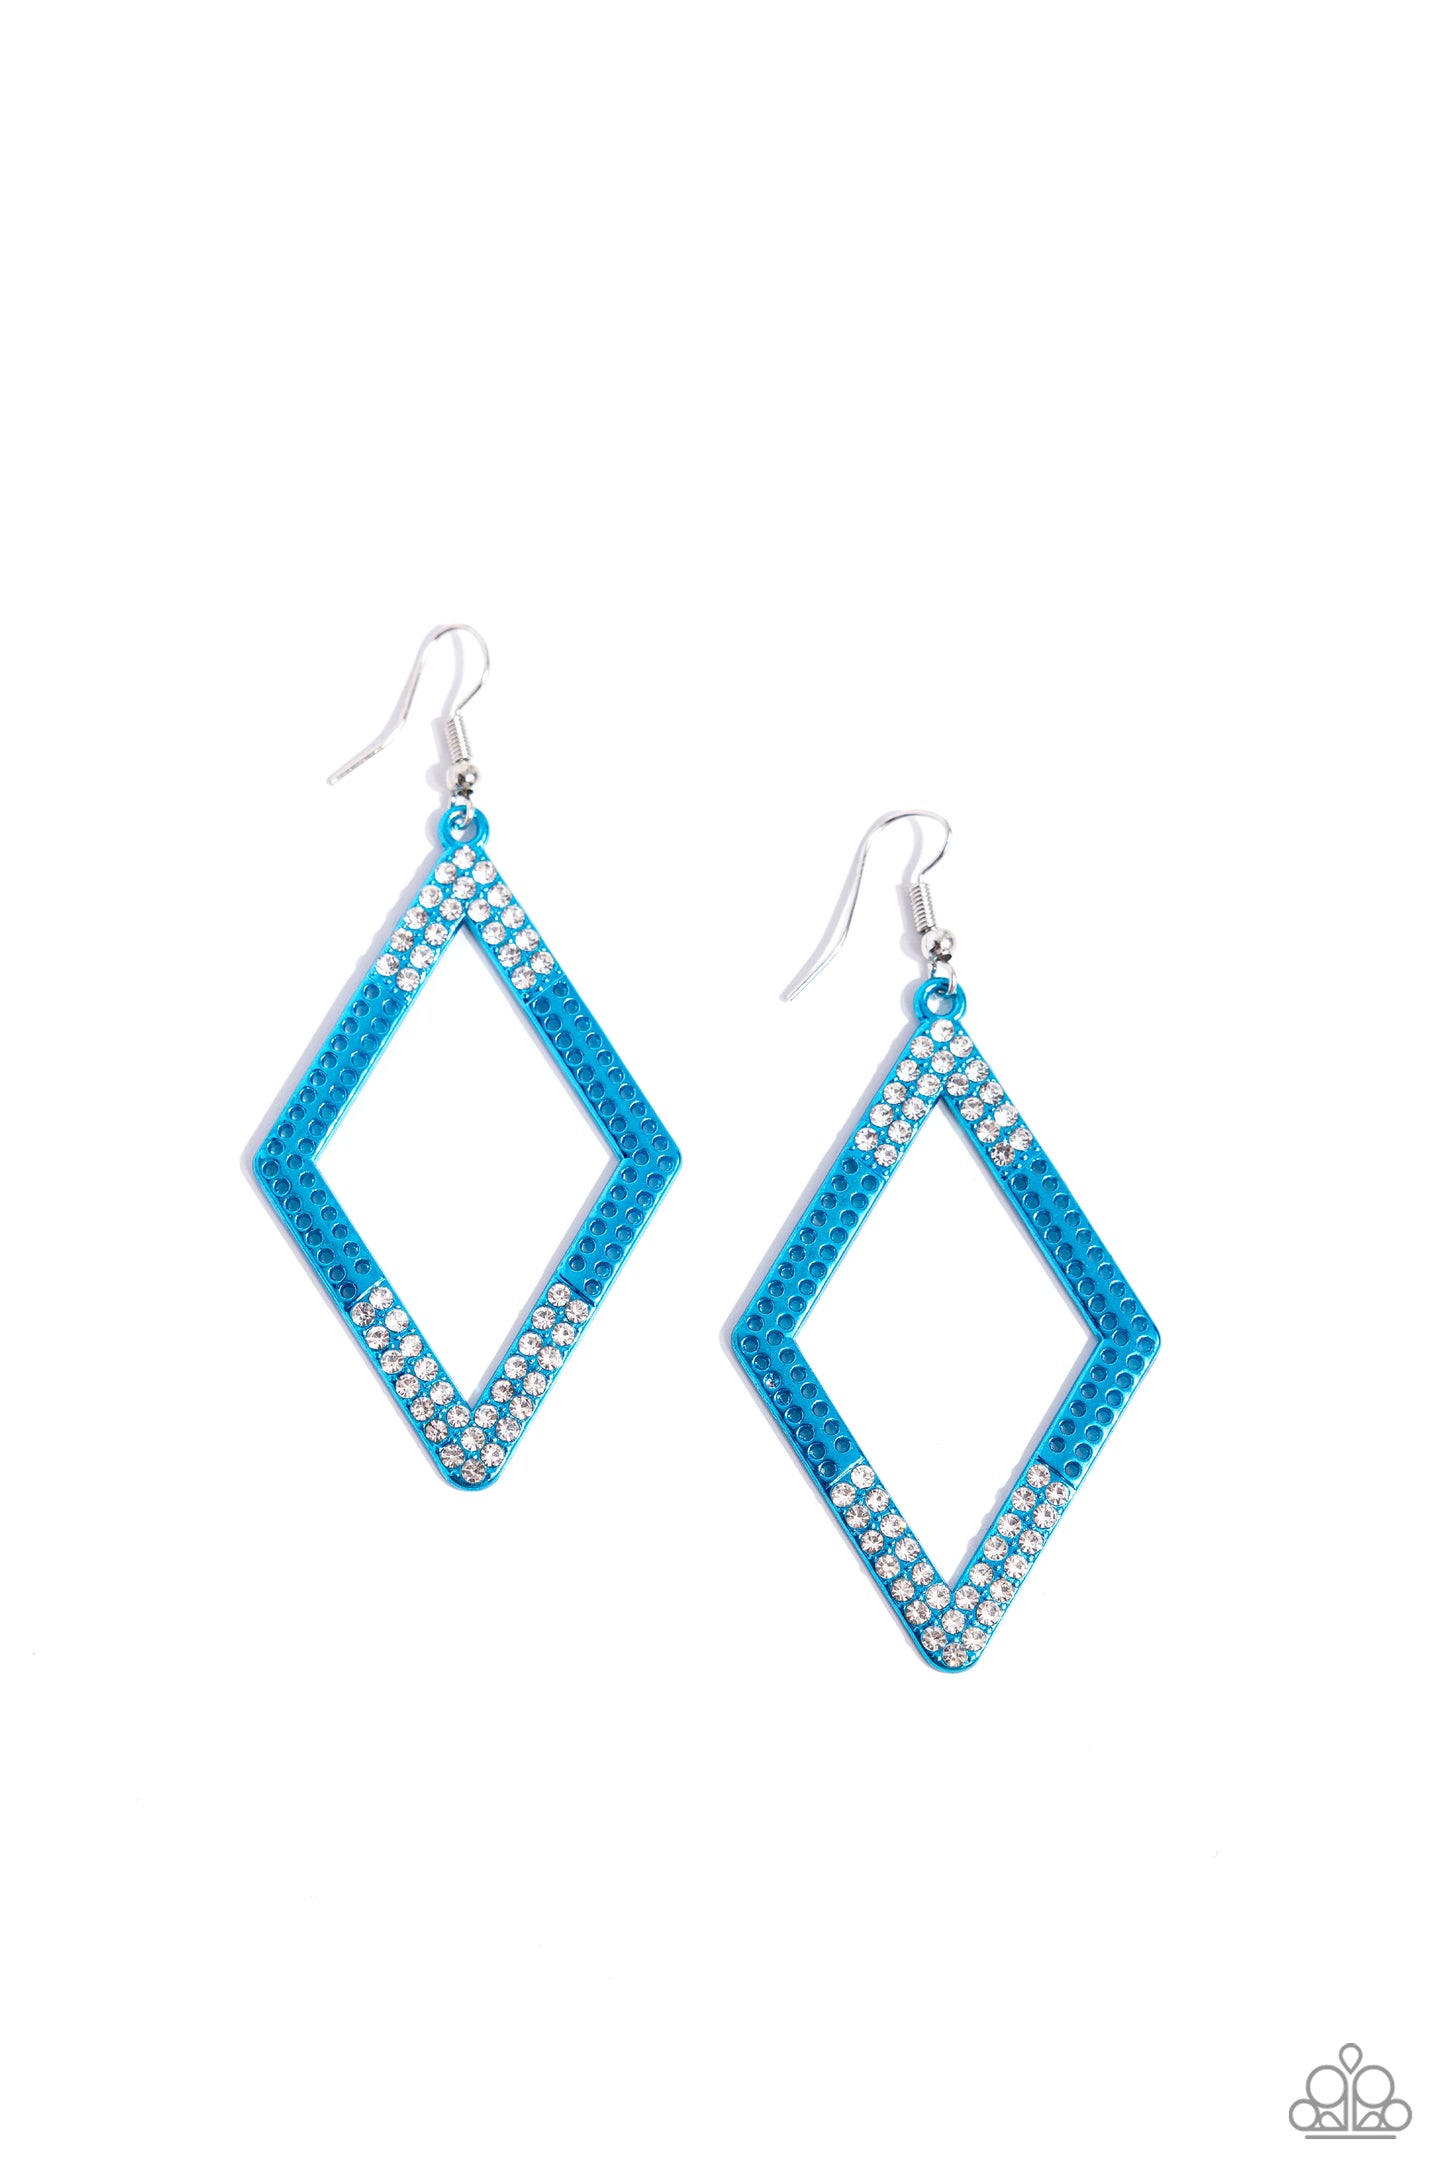 Paparazzi Accessories - Eloquently Edgy - Blue Earrings dipped in an electric blue hue, a dotted diamond frame is sprinkled with dainty white rhinestones on its ends for a dazzling, dynamic design. Earring attaches to a standard fishhook fitting. Sold as one pair of earrings.